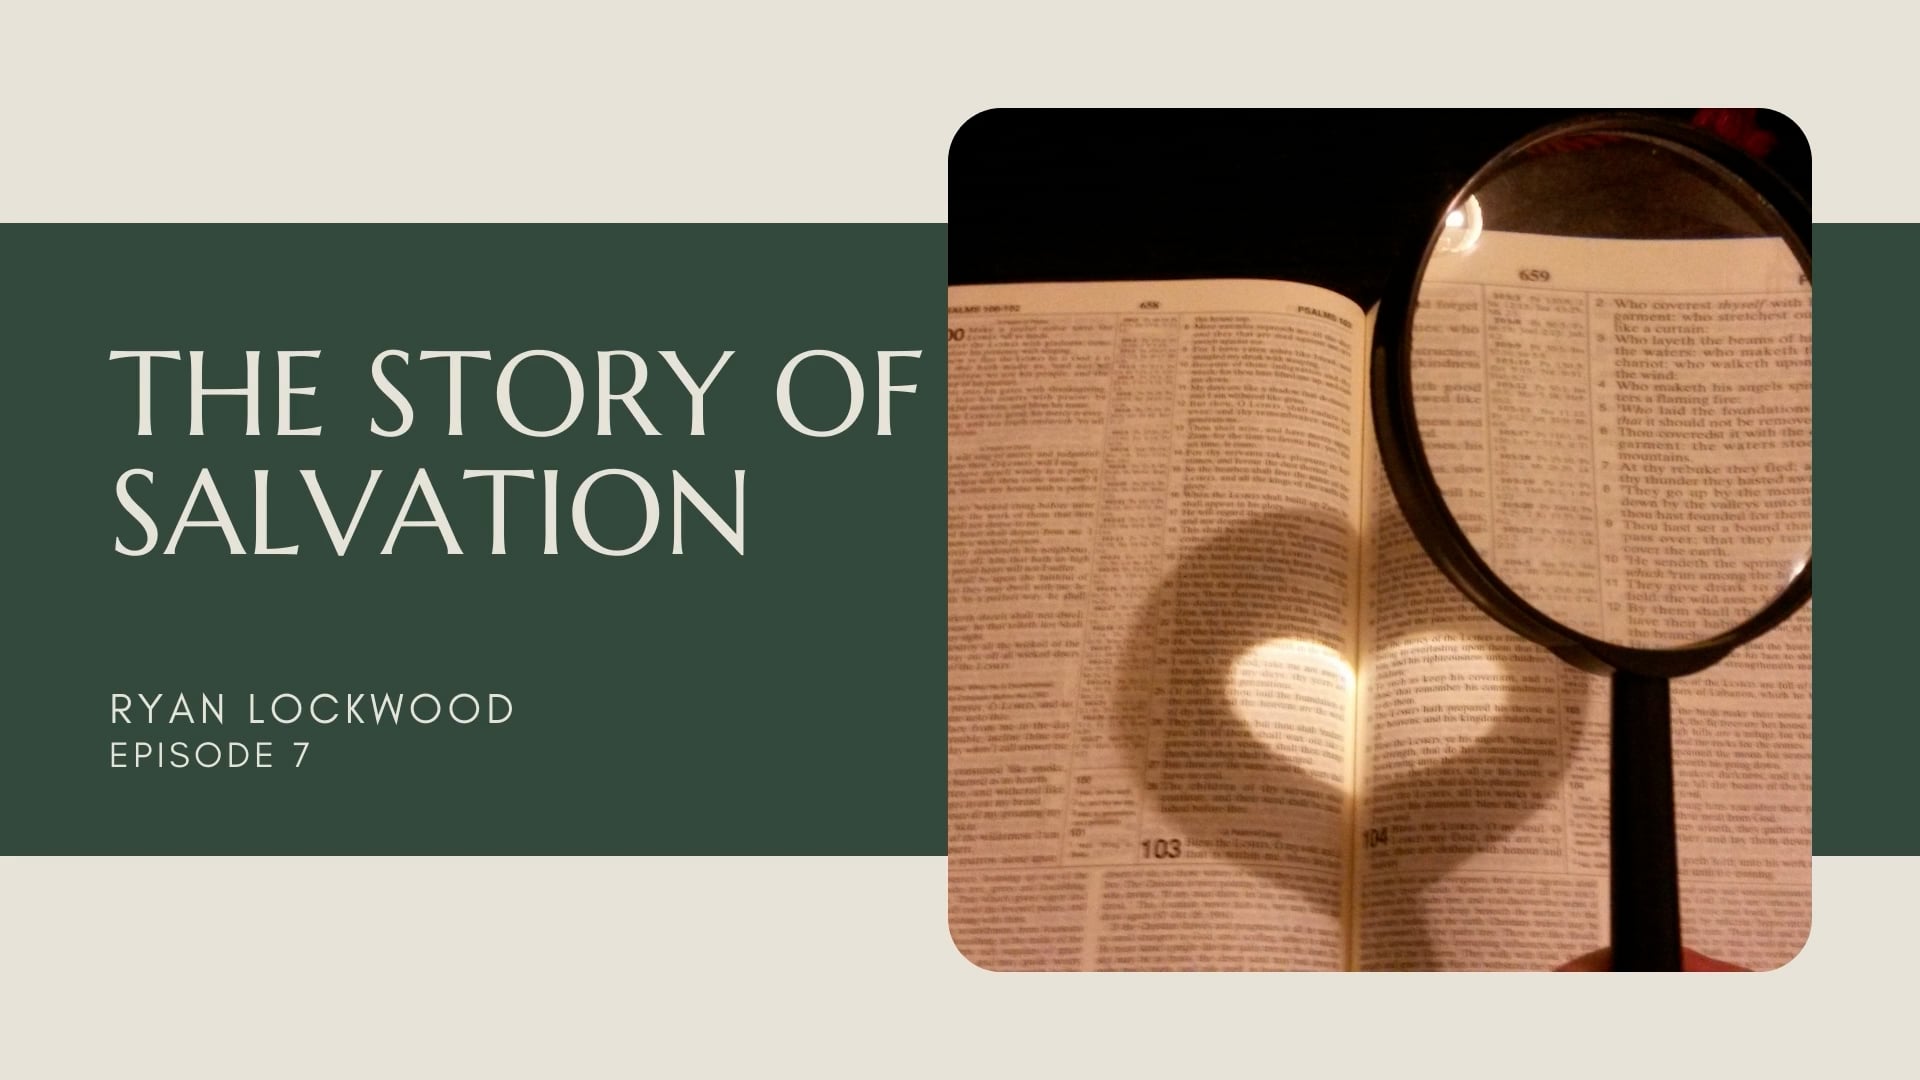 5 Minute Catechism - The Story of Salvation